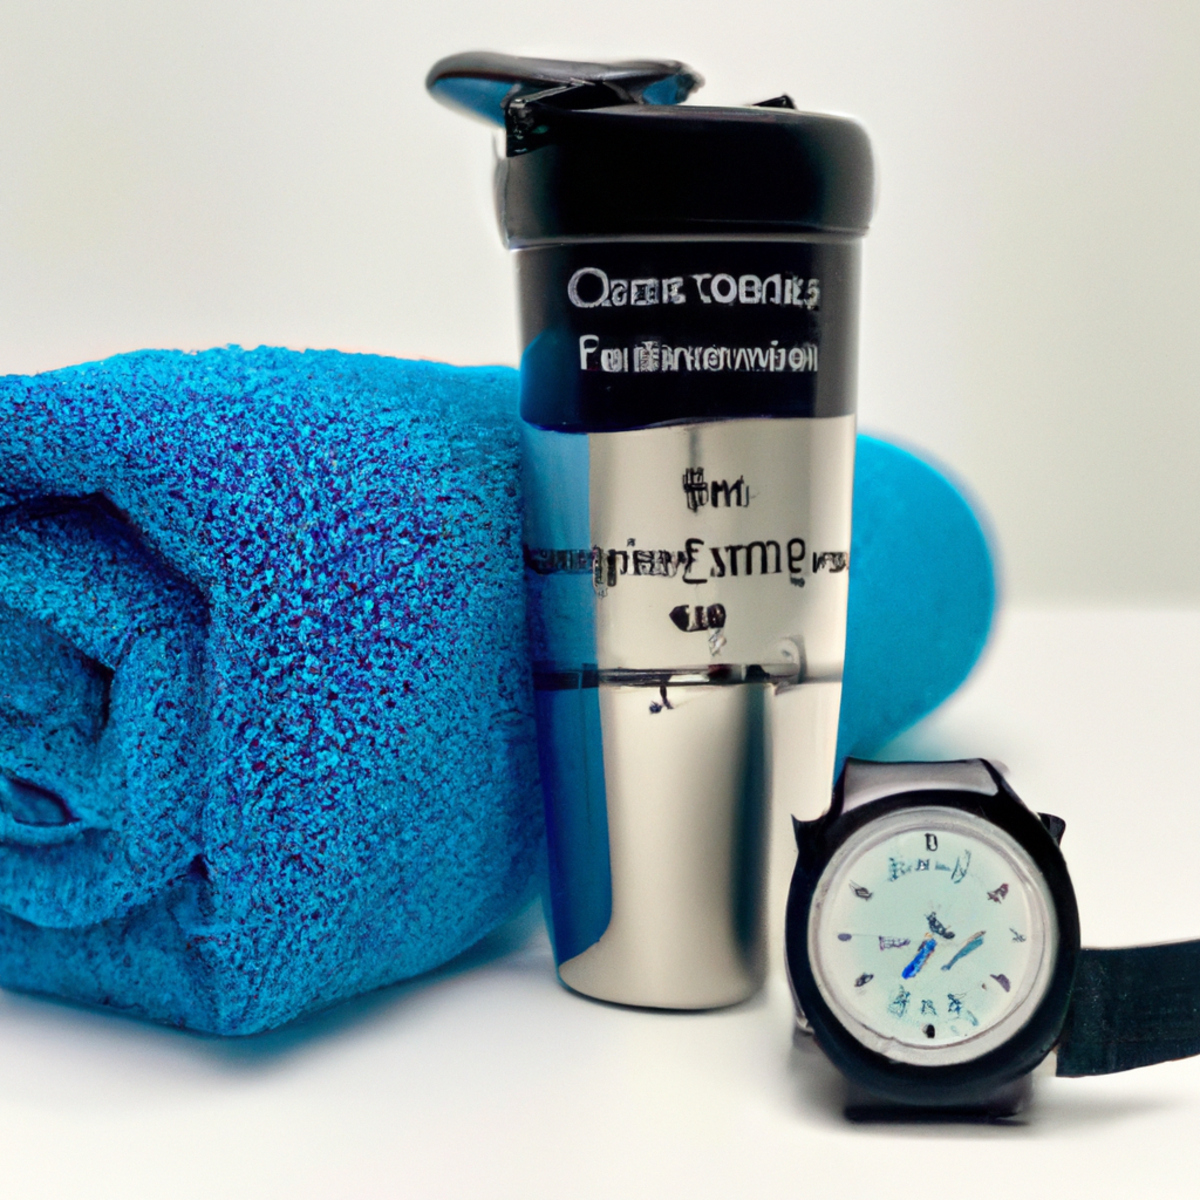 The photo captures a sleek fitness tracker watch, a pair of wireless earbuds, and a water bottle placed on a gym towel. The watch displays the user's heart rate, steps taken, and calories burned, while the earbuds provide a seamless connection to the user's workout playlist. The water bottle is adorned with motivational quotes and reminders to stay hydrated during exercise. The objects are arranged in a way that suggests an active and focused workout session. The photo perfectly encapsulates the integration of technology and fitness, highlighting the convenience and effectiveness of using fitness apps and wearables to enhance one's exercise routine.